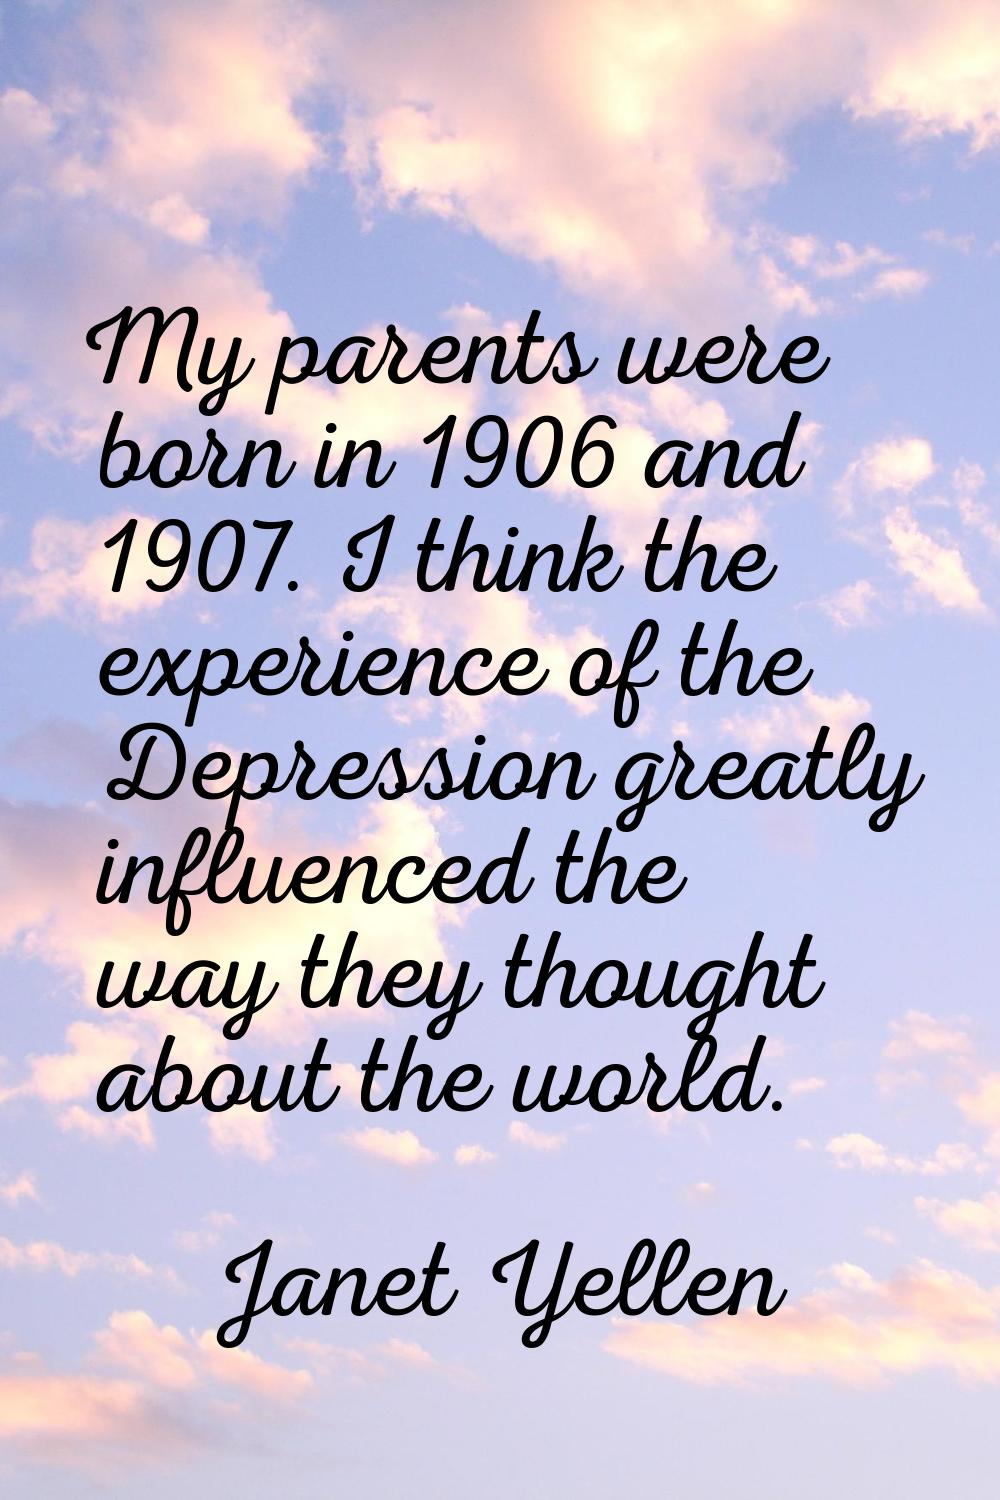 My parents were born in 1906 and 1907. I think the experience of the Depression greatly influenced 